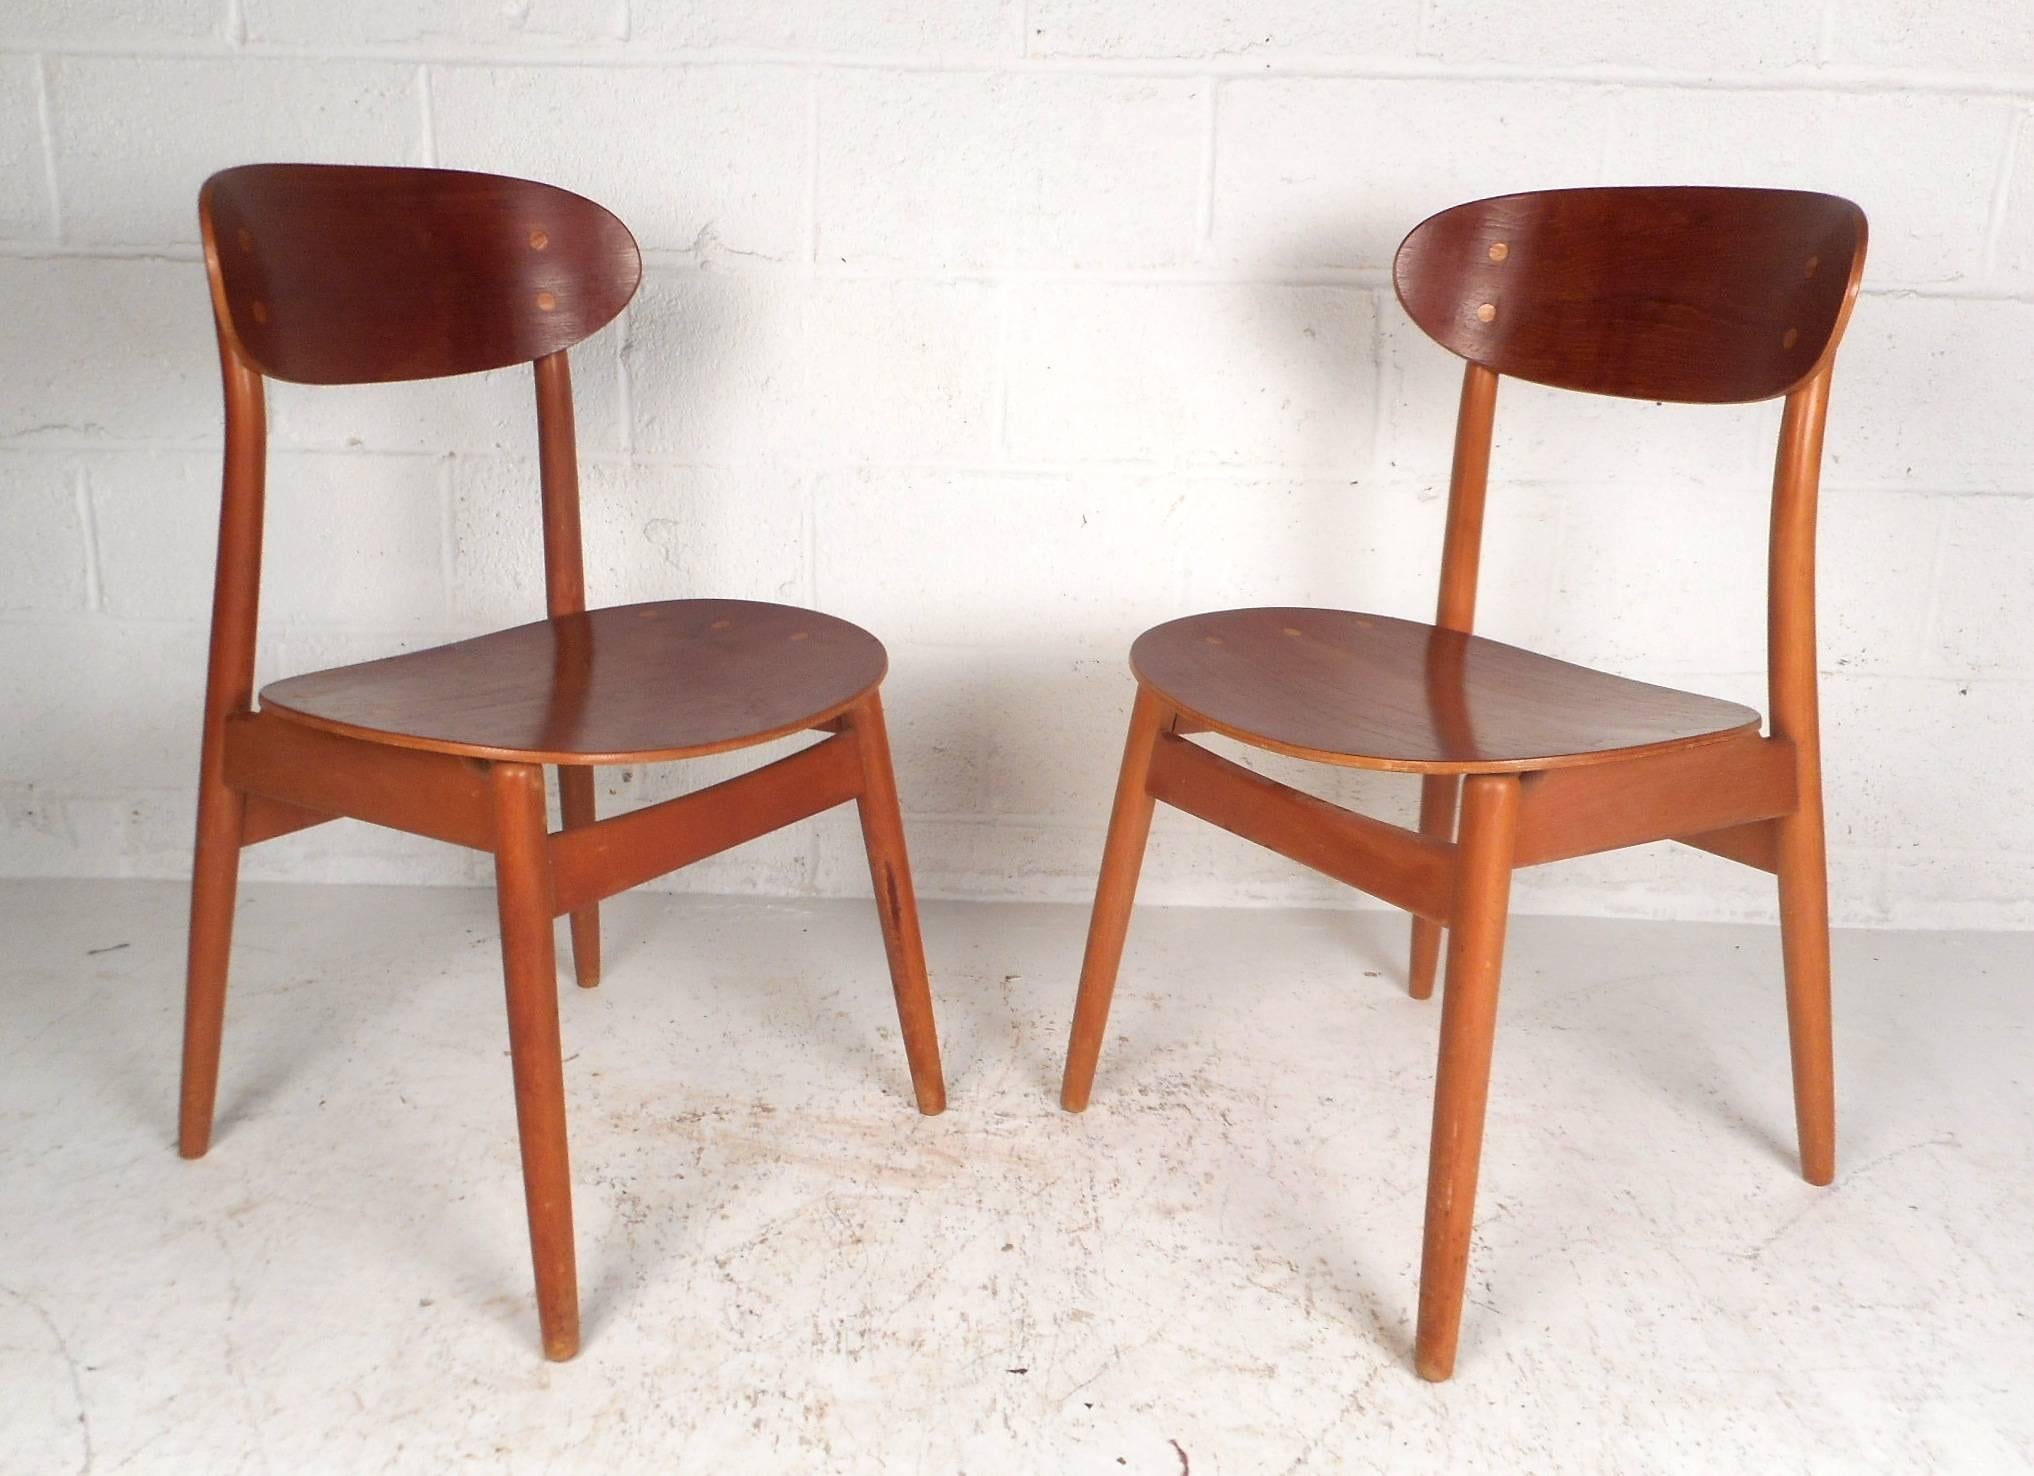 Bring home iconic Scandinavian mid-century design with this charming pair of beech dining chairs designed by Swedish architect Sven Erik Fryklund (1921-2003) for his nation's Hagafors Stolfabrik. A lightweight bentwood design shows off American